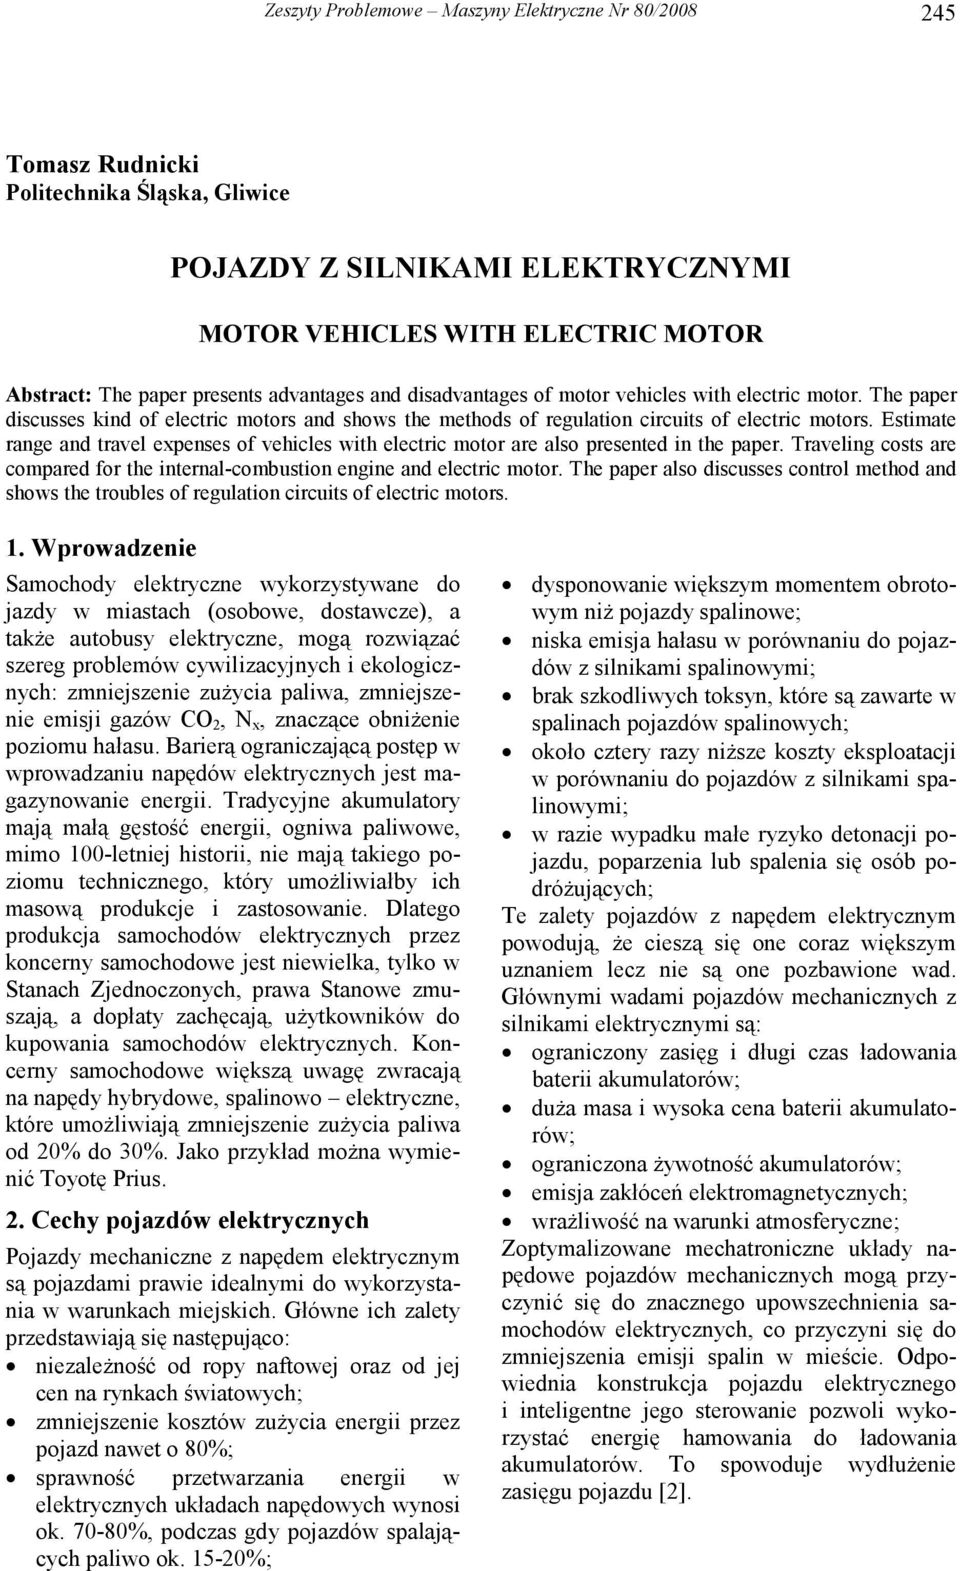 Estimate range and travel expenses of vehicles with electric motor are also presented in the paper. Traveling costs are compared for the internal-combustion engine and electric motor.